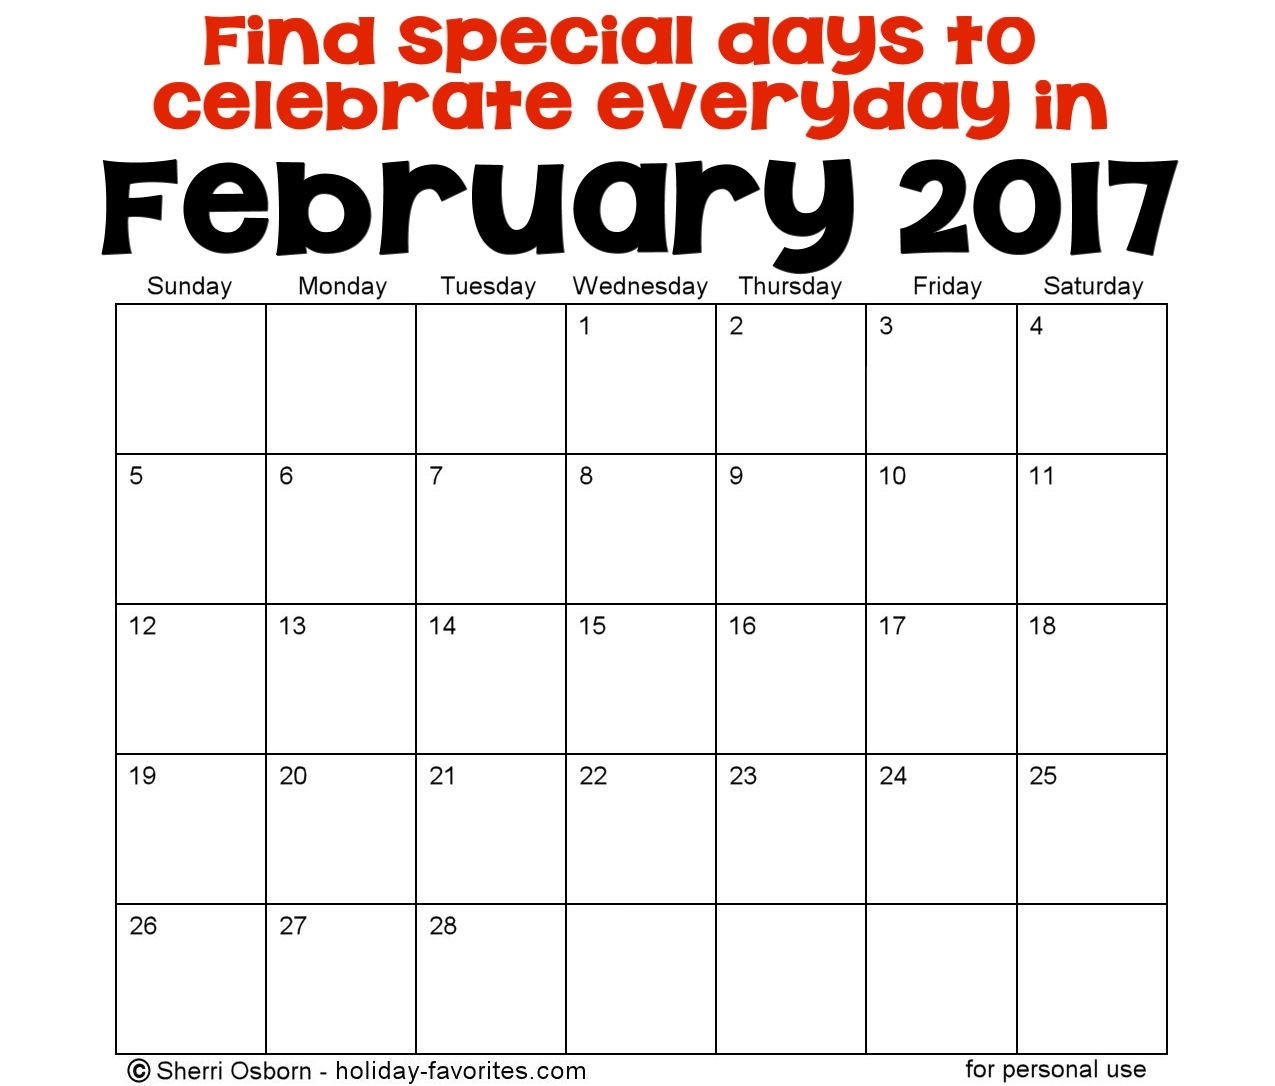 February Holidays And Special Days | Holiday Favorites Calendar Holidays And Special Days